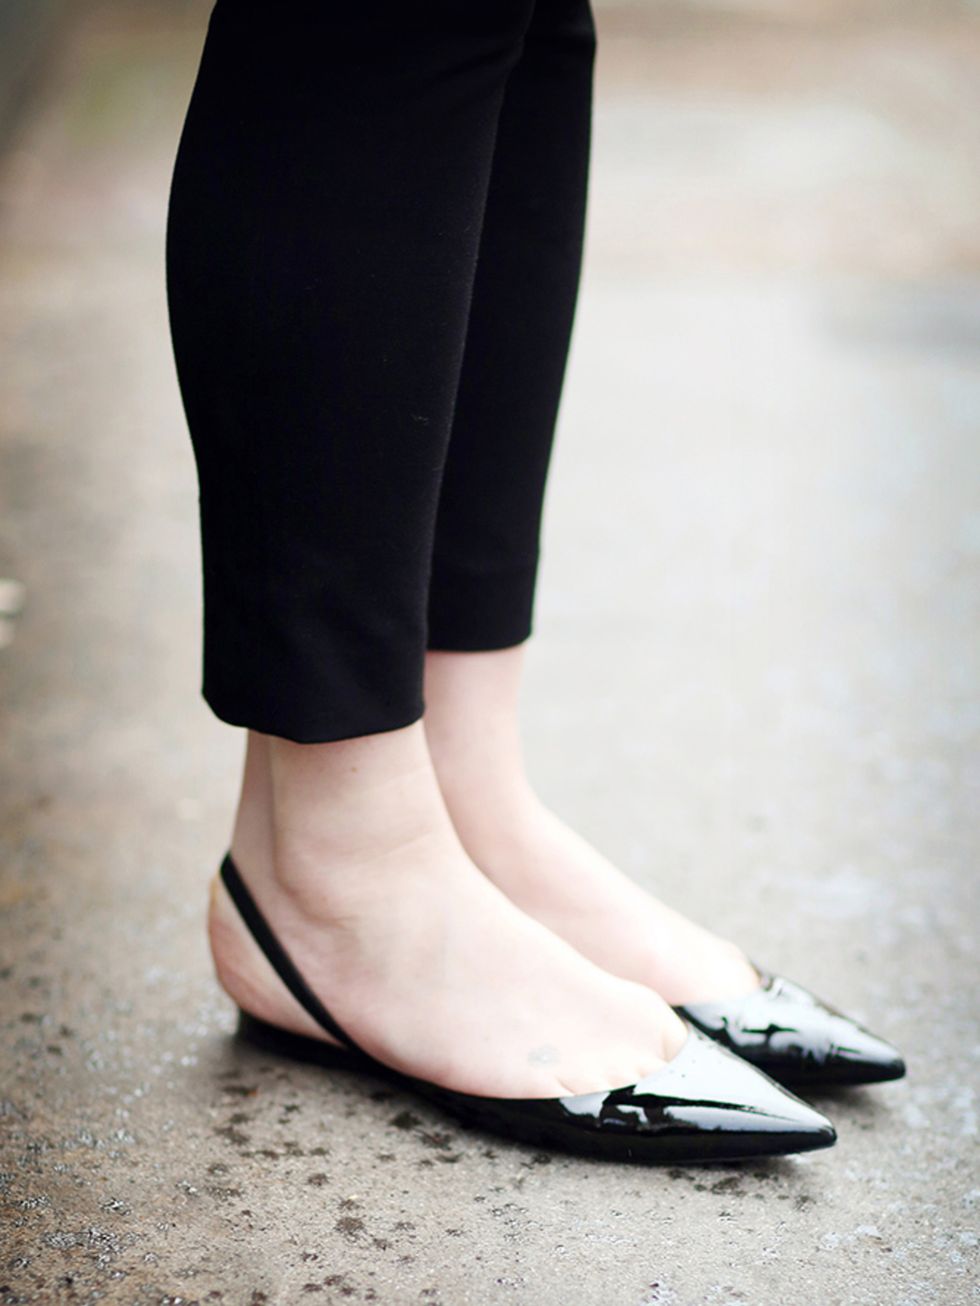 <p>Lorraine Candy - Editor-in-Chief.</p>

<p>Joseph trousers and Jimmy Choo shoes.</p>